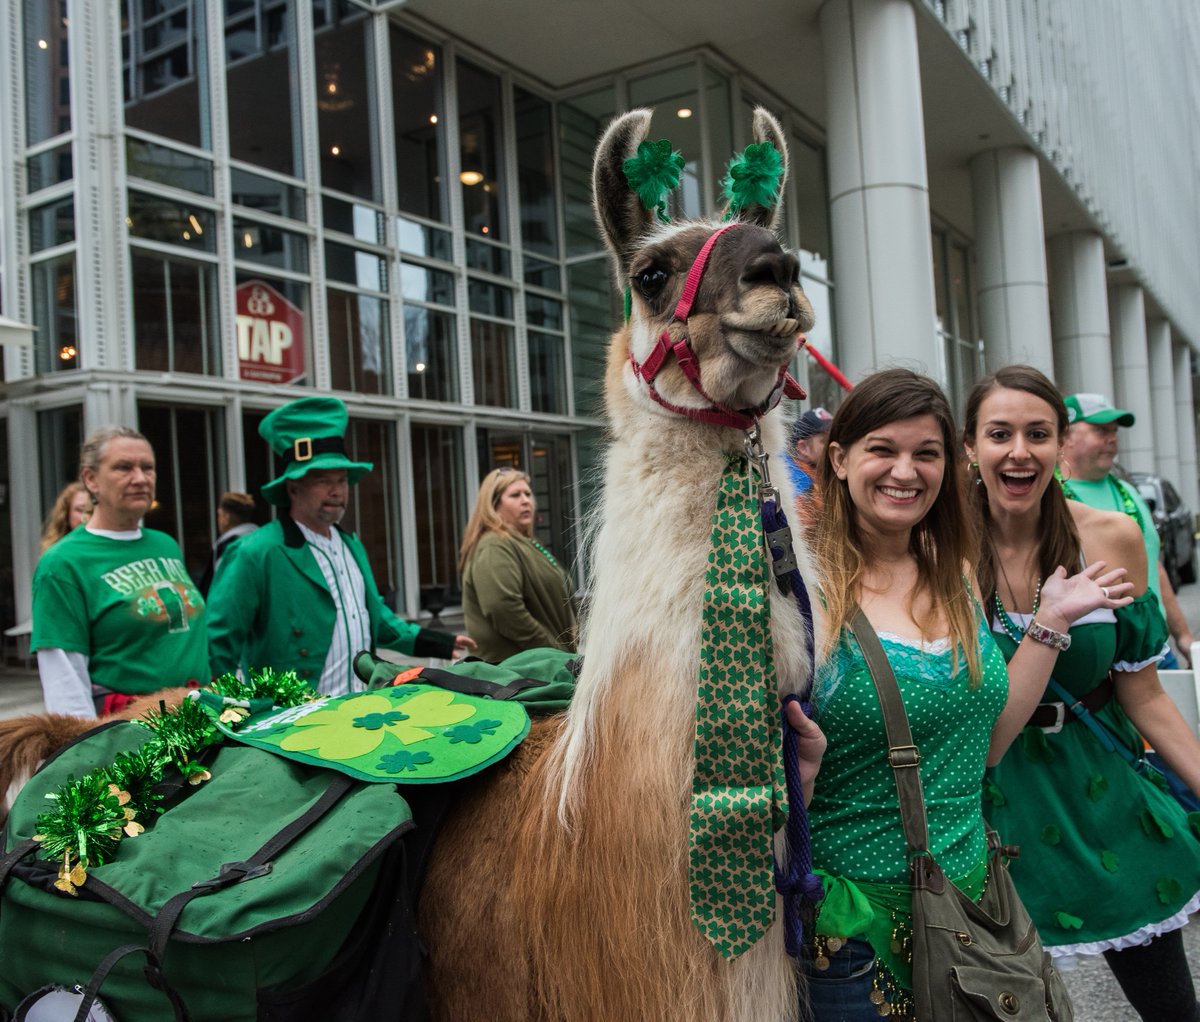 ☘️ The Atlanta St. Patrick's Parade is Happening in Midtown on March 16 We spoke with @IrishNetworkATL about what's in store, and this celebration promises to be the biggest one yet. Learn how you can join in on the festivities and make a day of it: bit.ly/48Oi1Yt